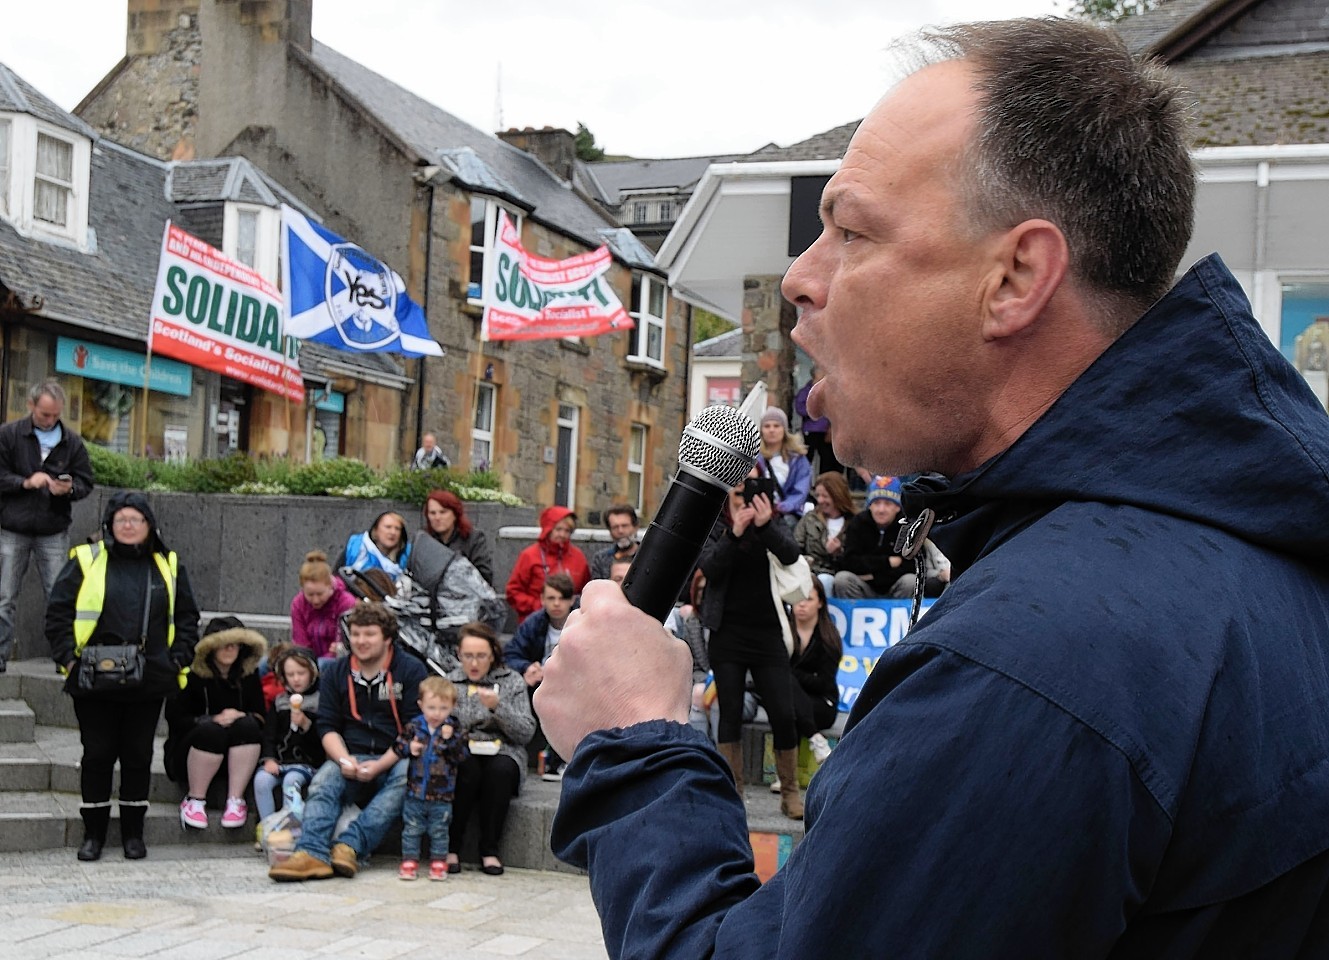 Tony Cox of the Unemployed Workers Network addresses crowds at the Fort William Anti-austerity rally